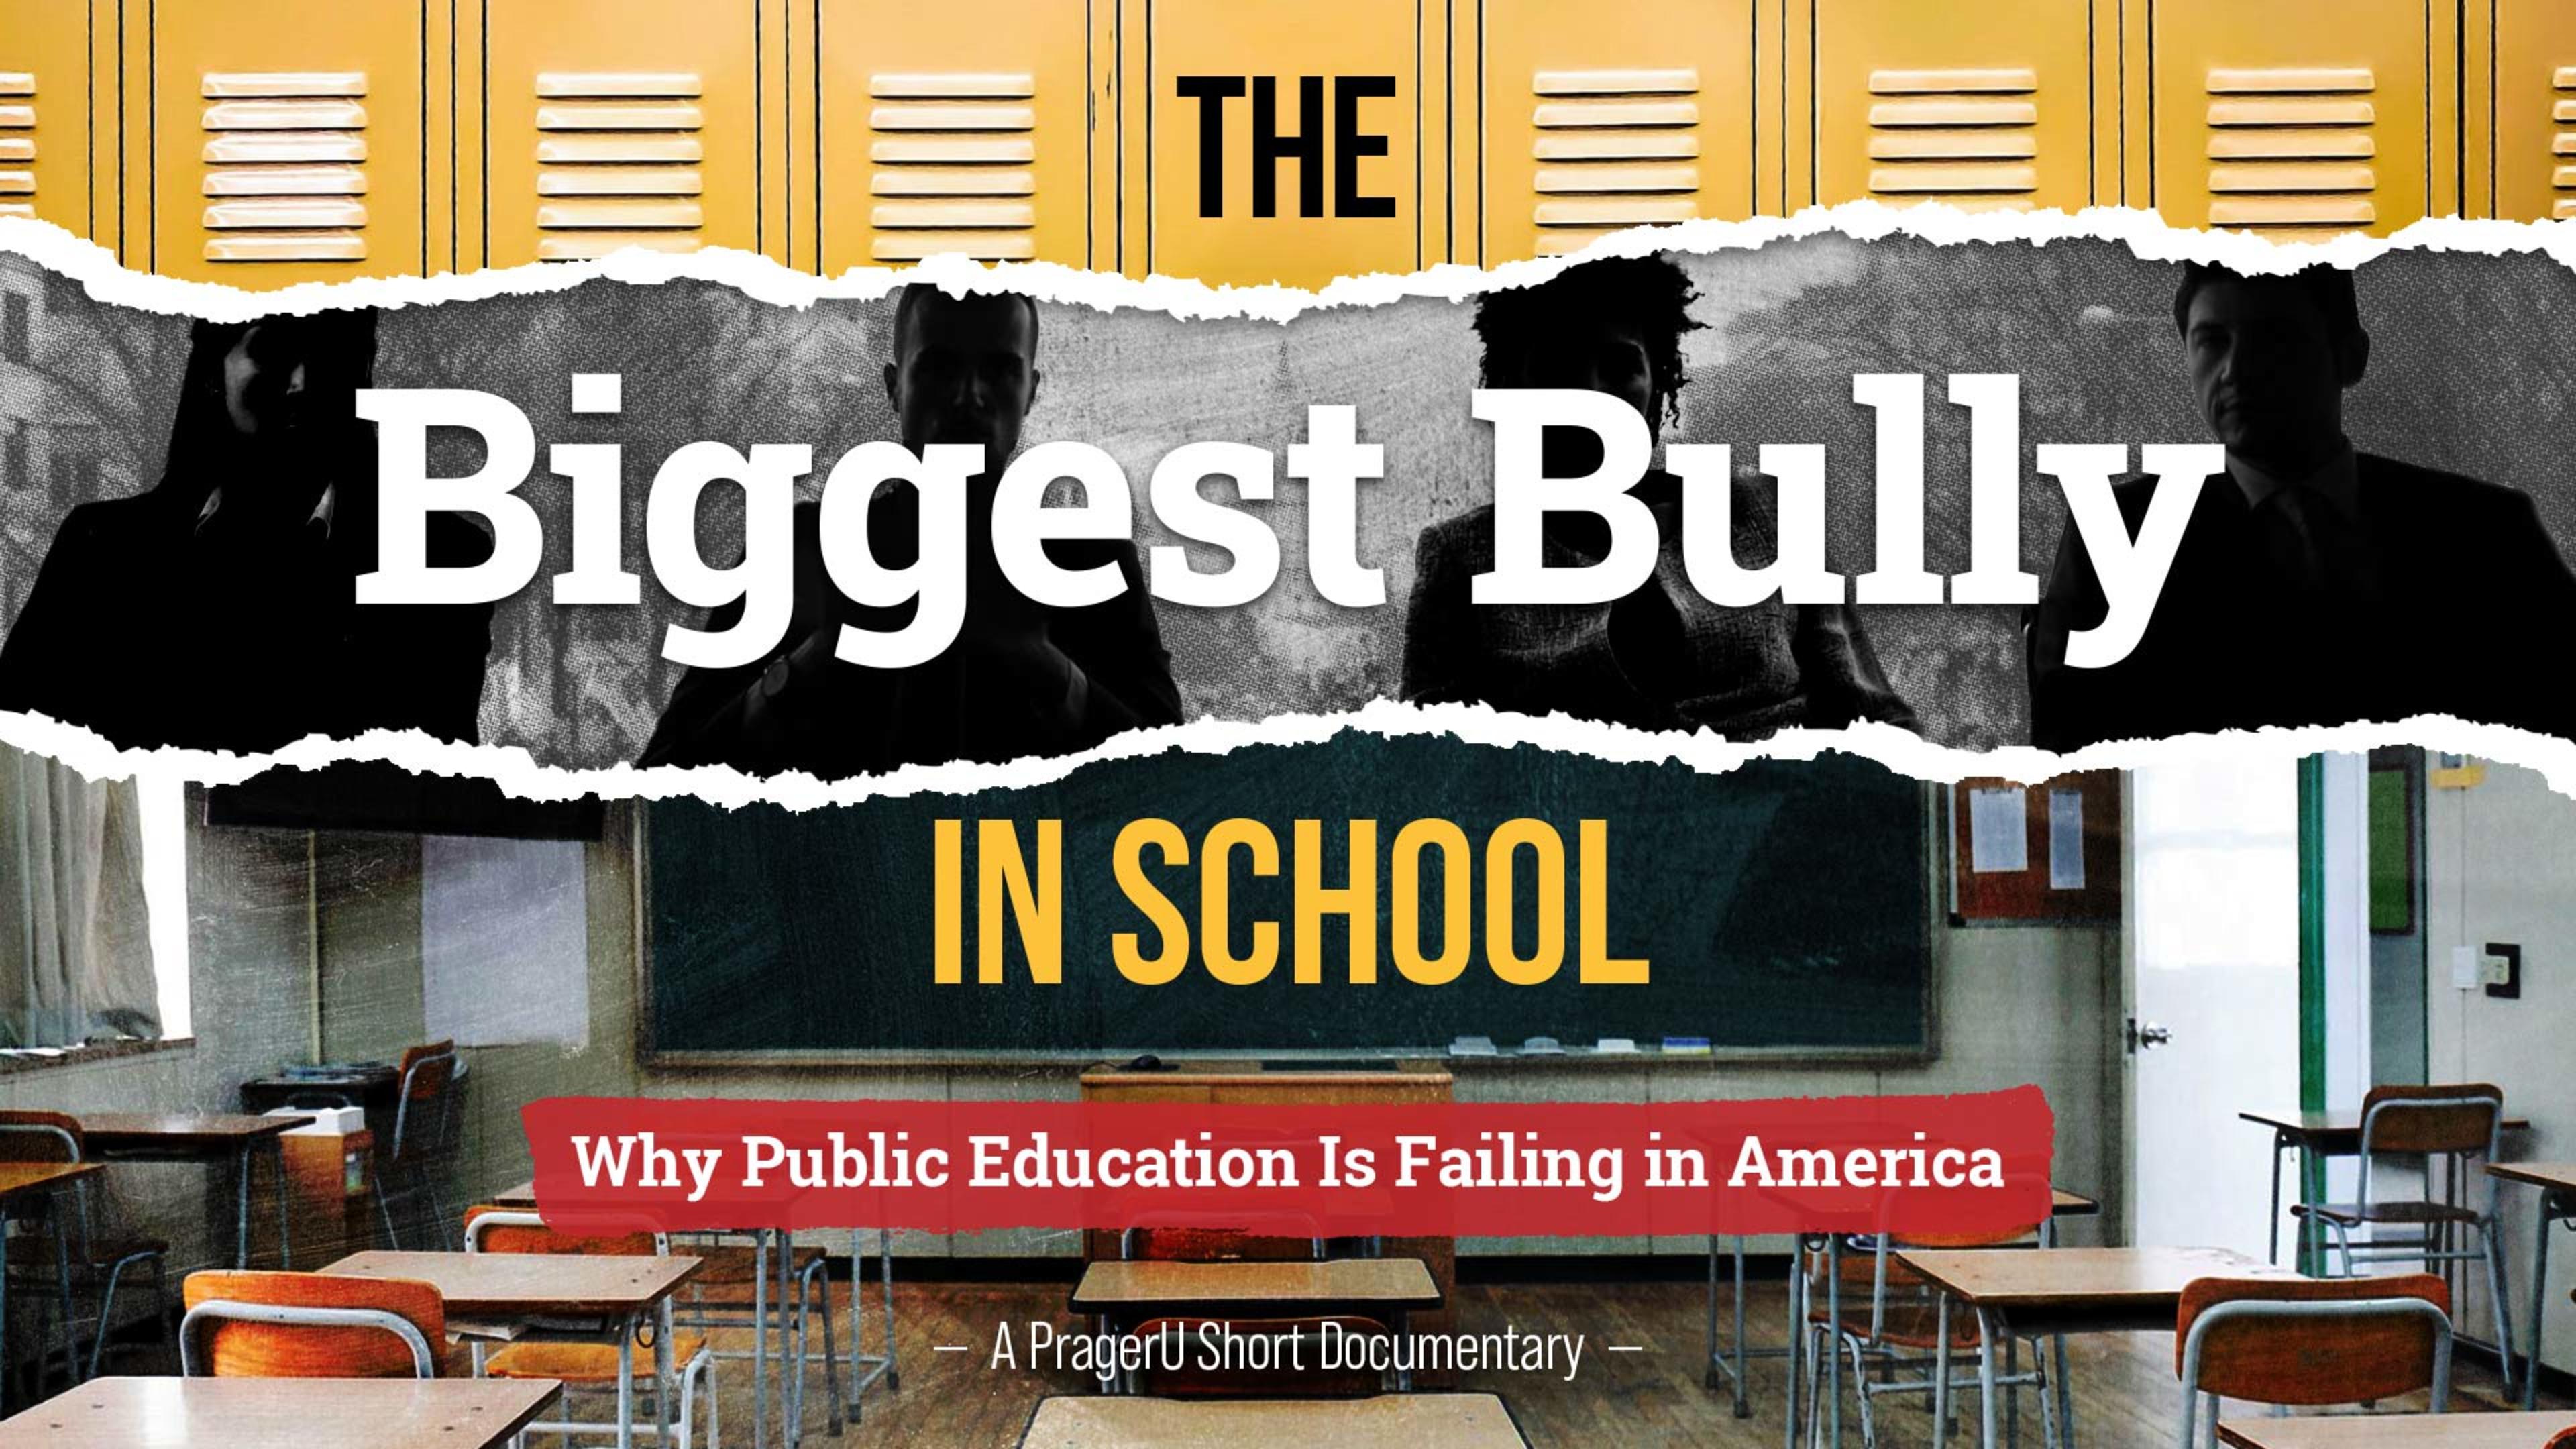 The Biggest Bully in School: Why Public Education Is Failing in America